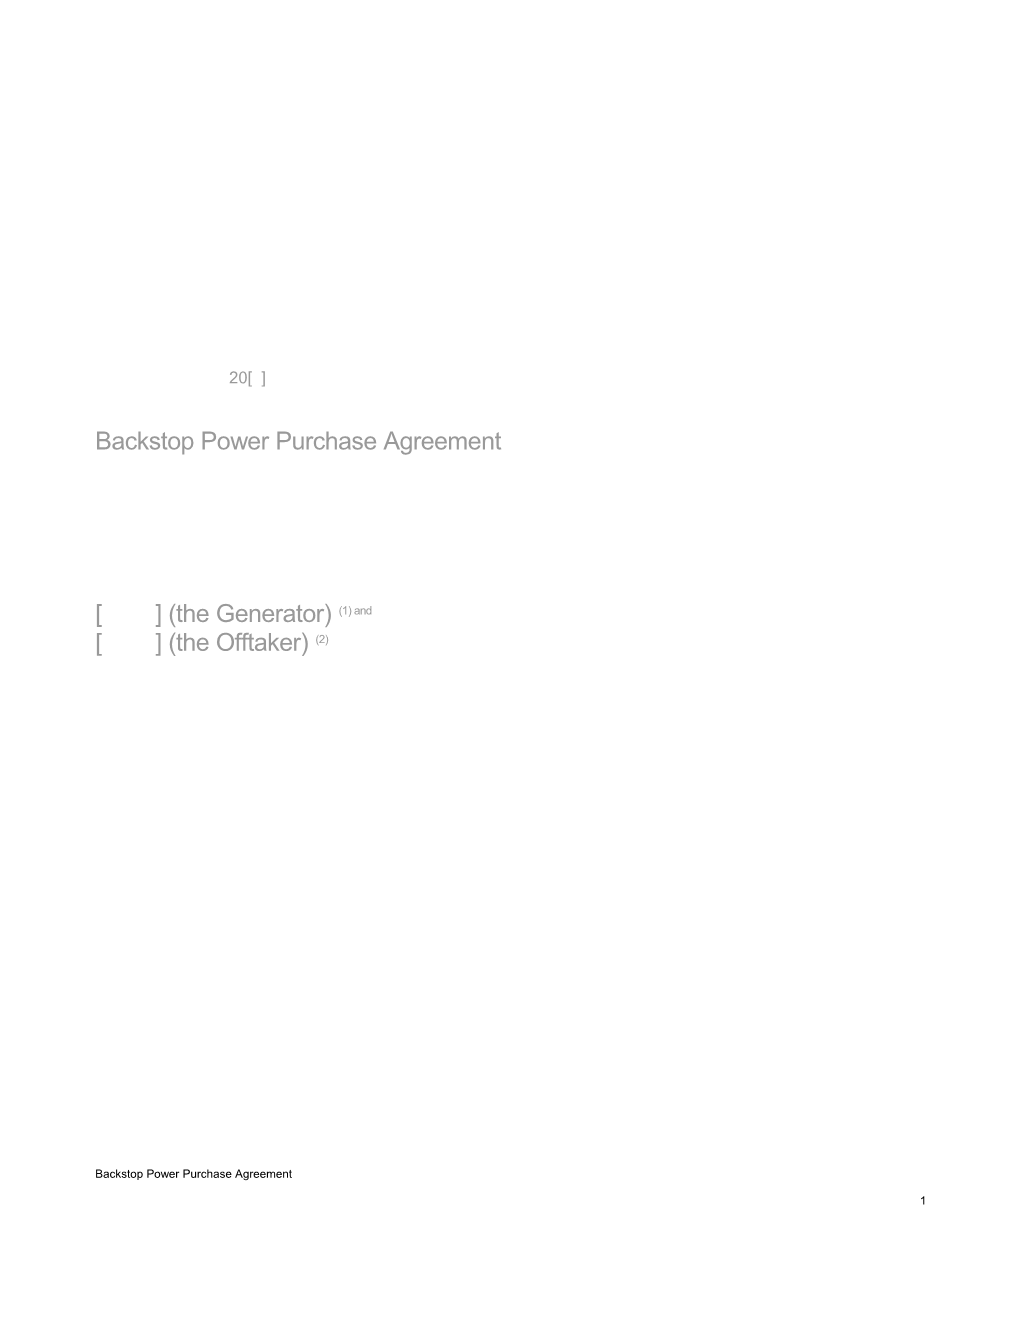 Backstop Power Purchase Agreement